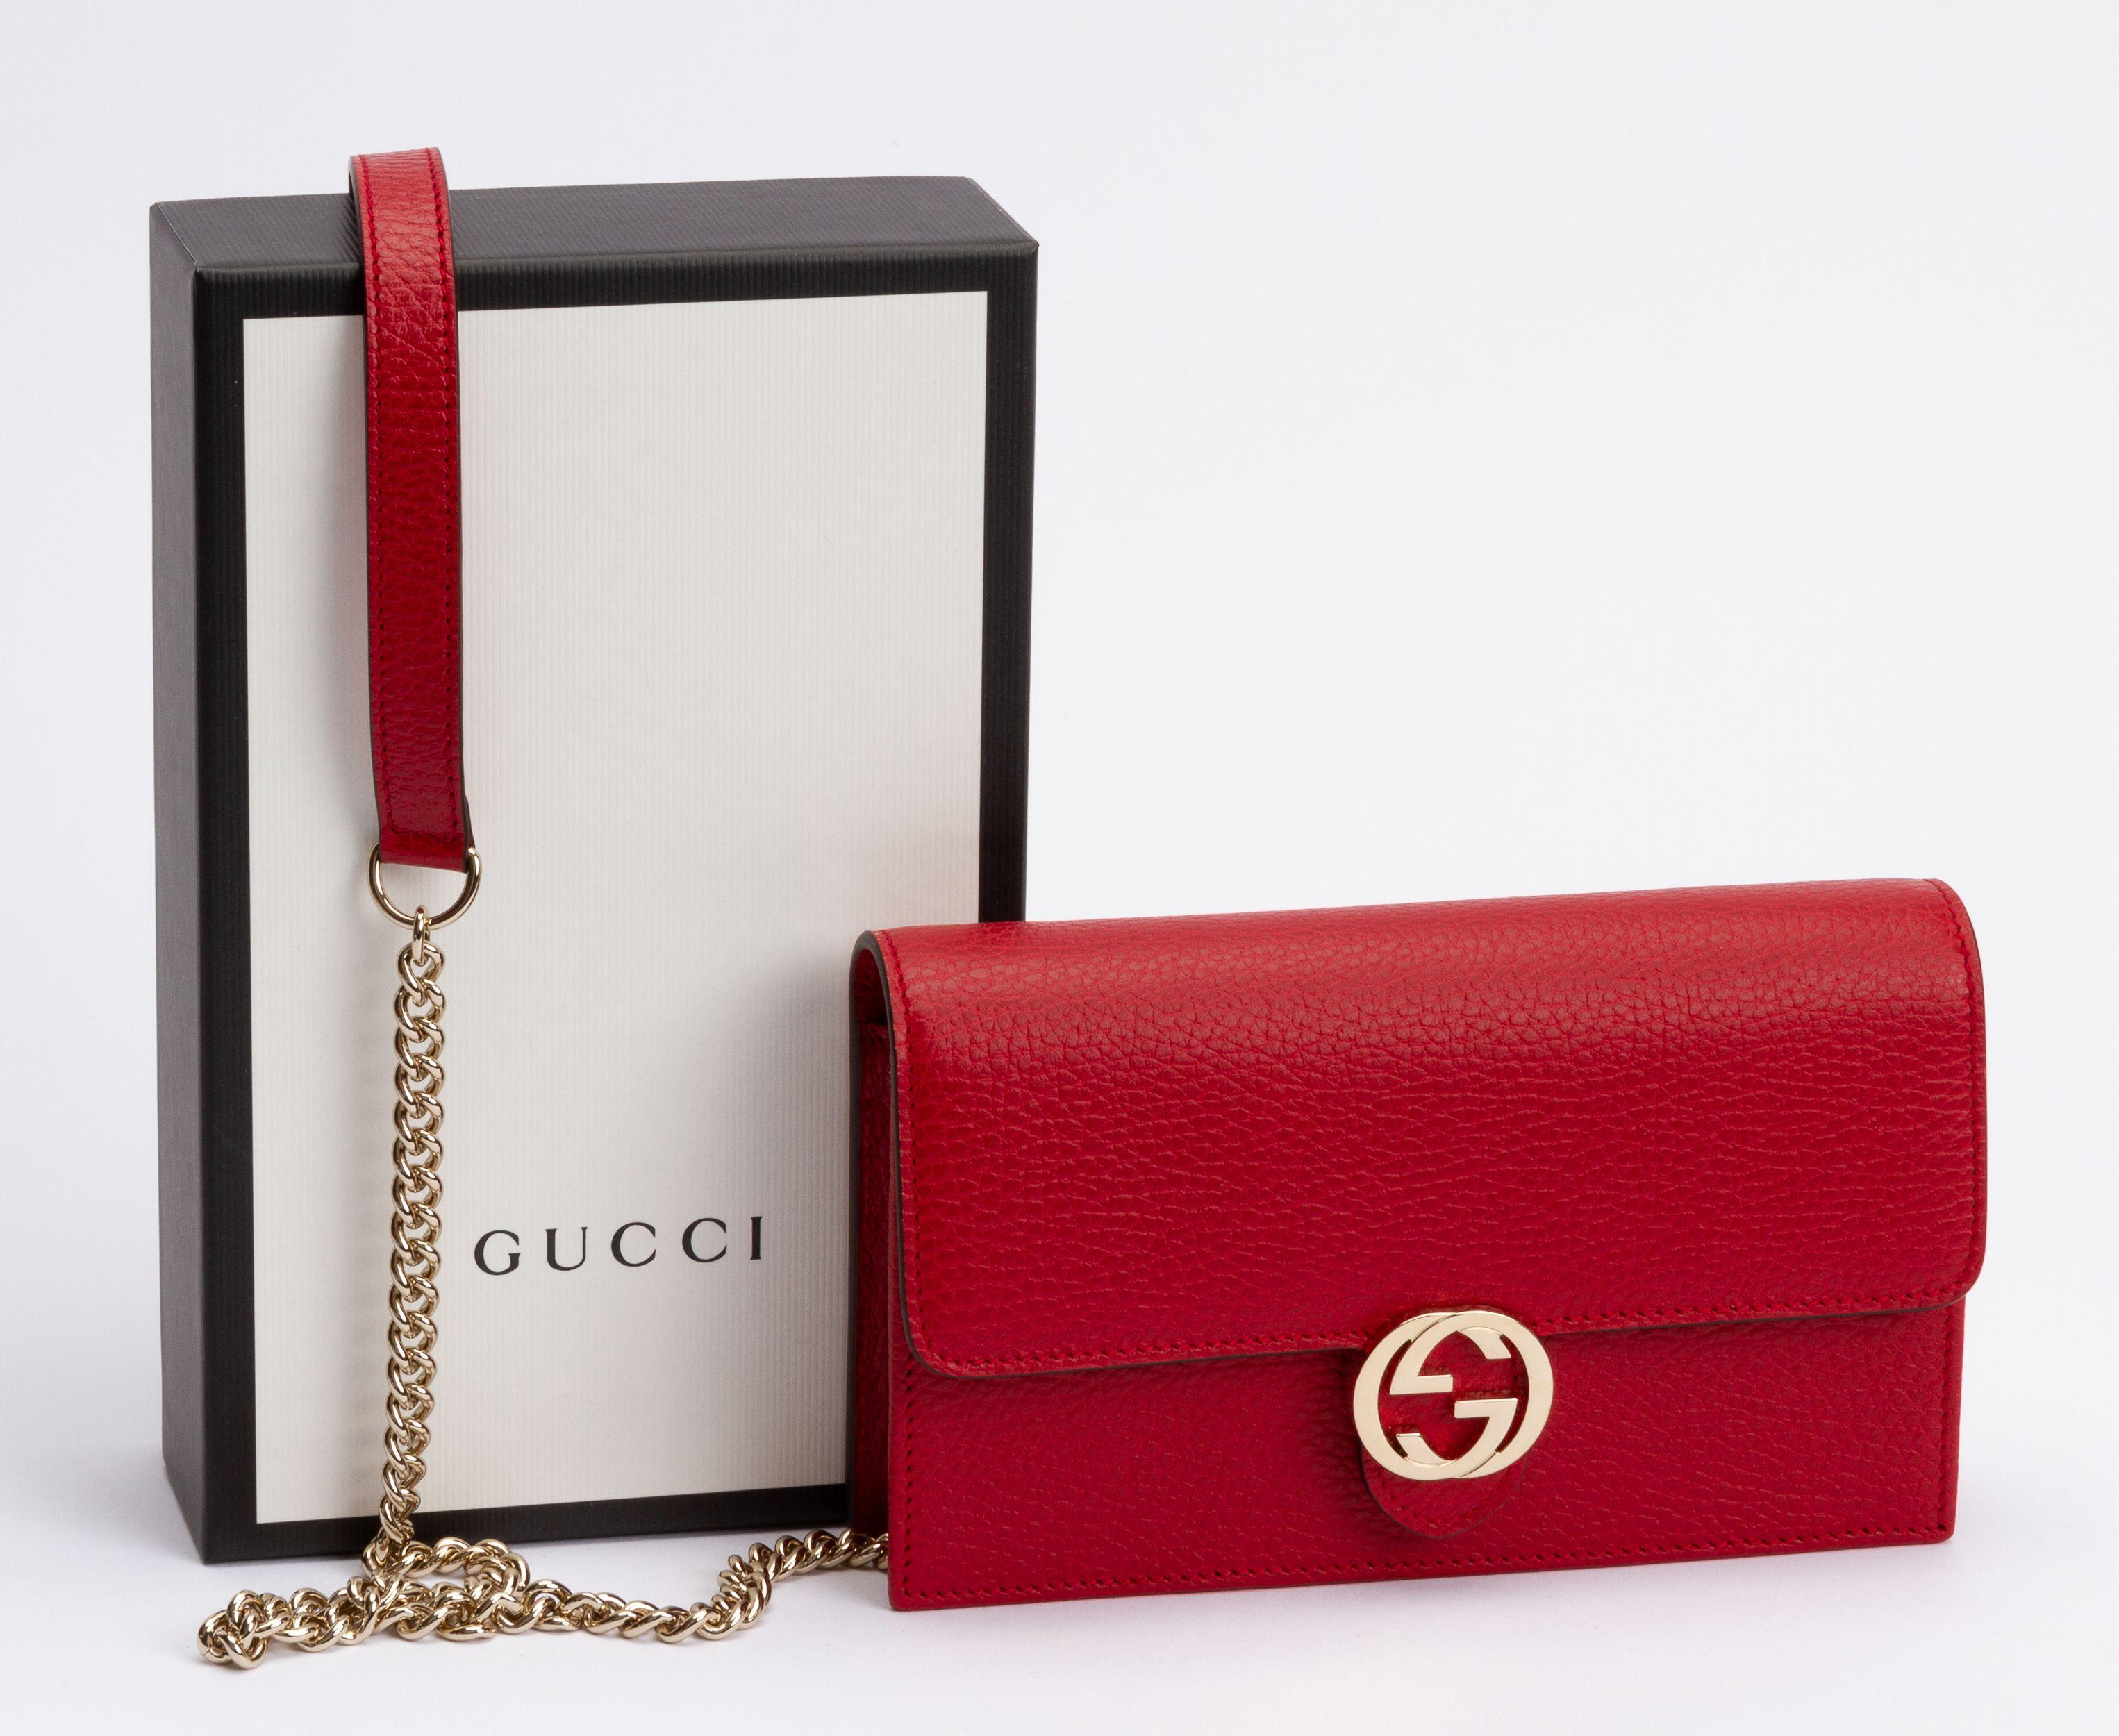 Gucci NIB Red Leather Cross Body Bag For Sale 1